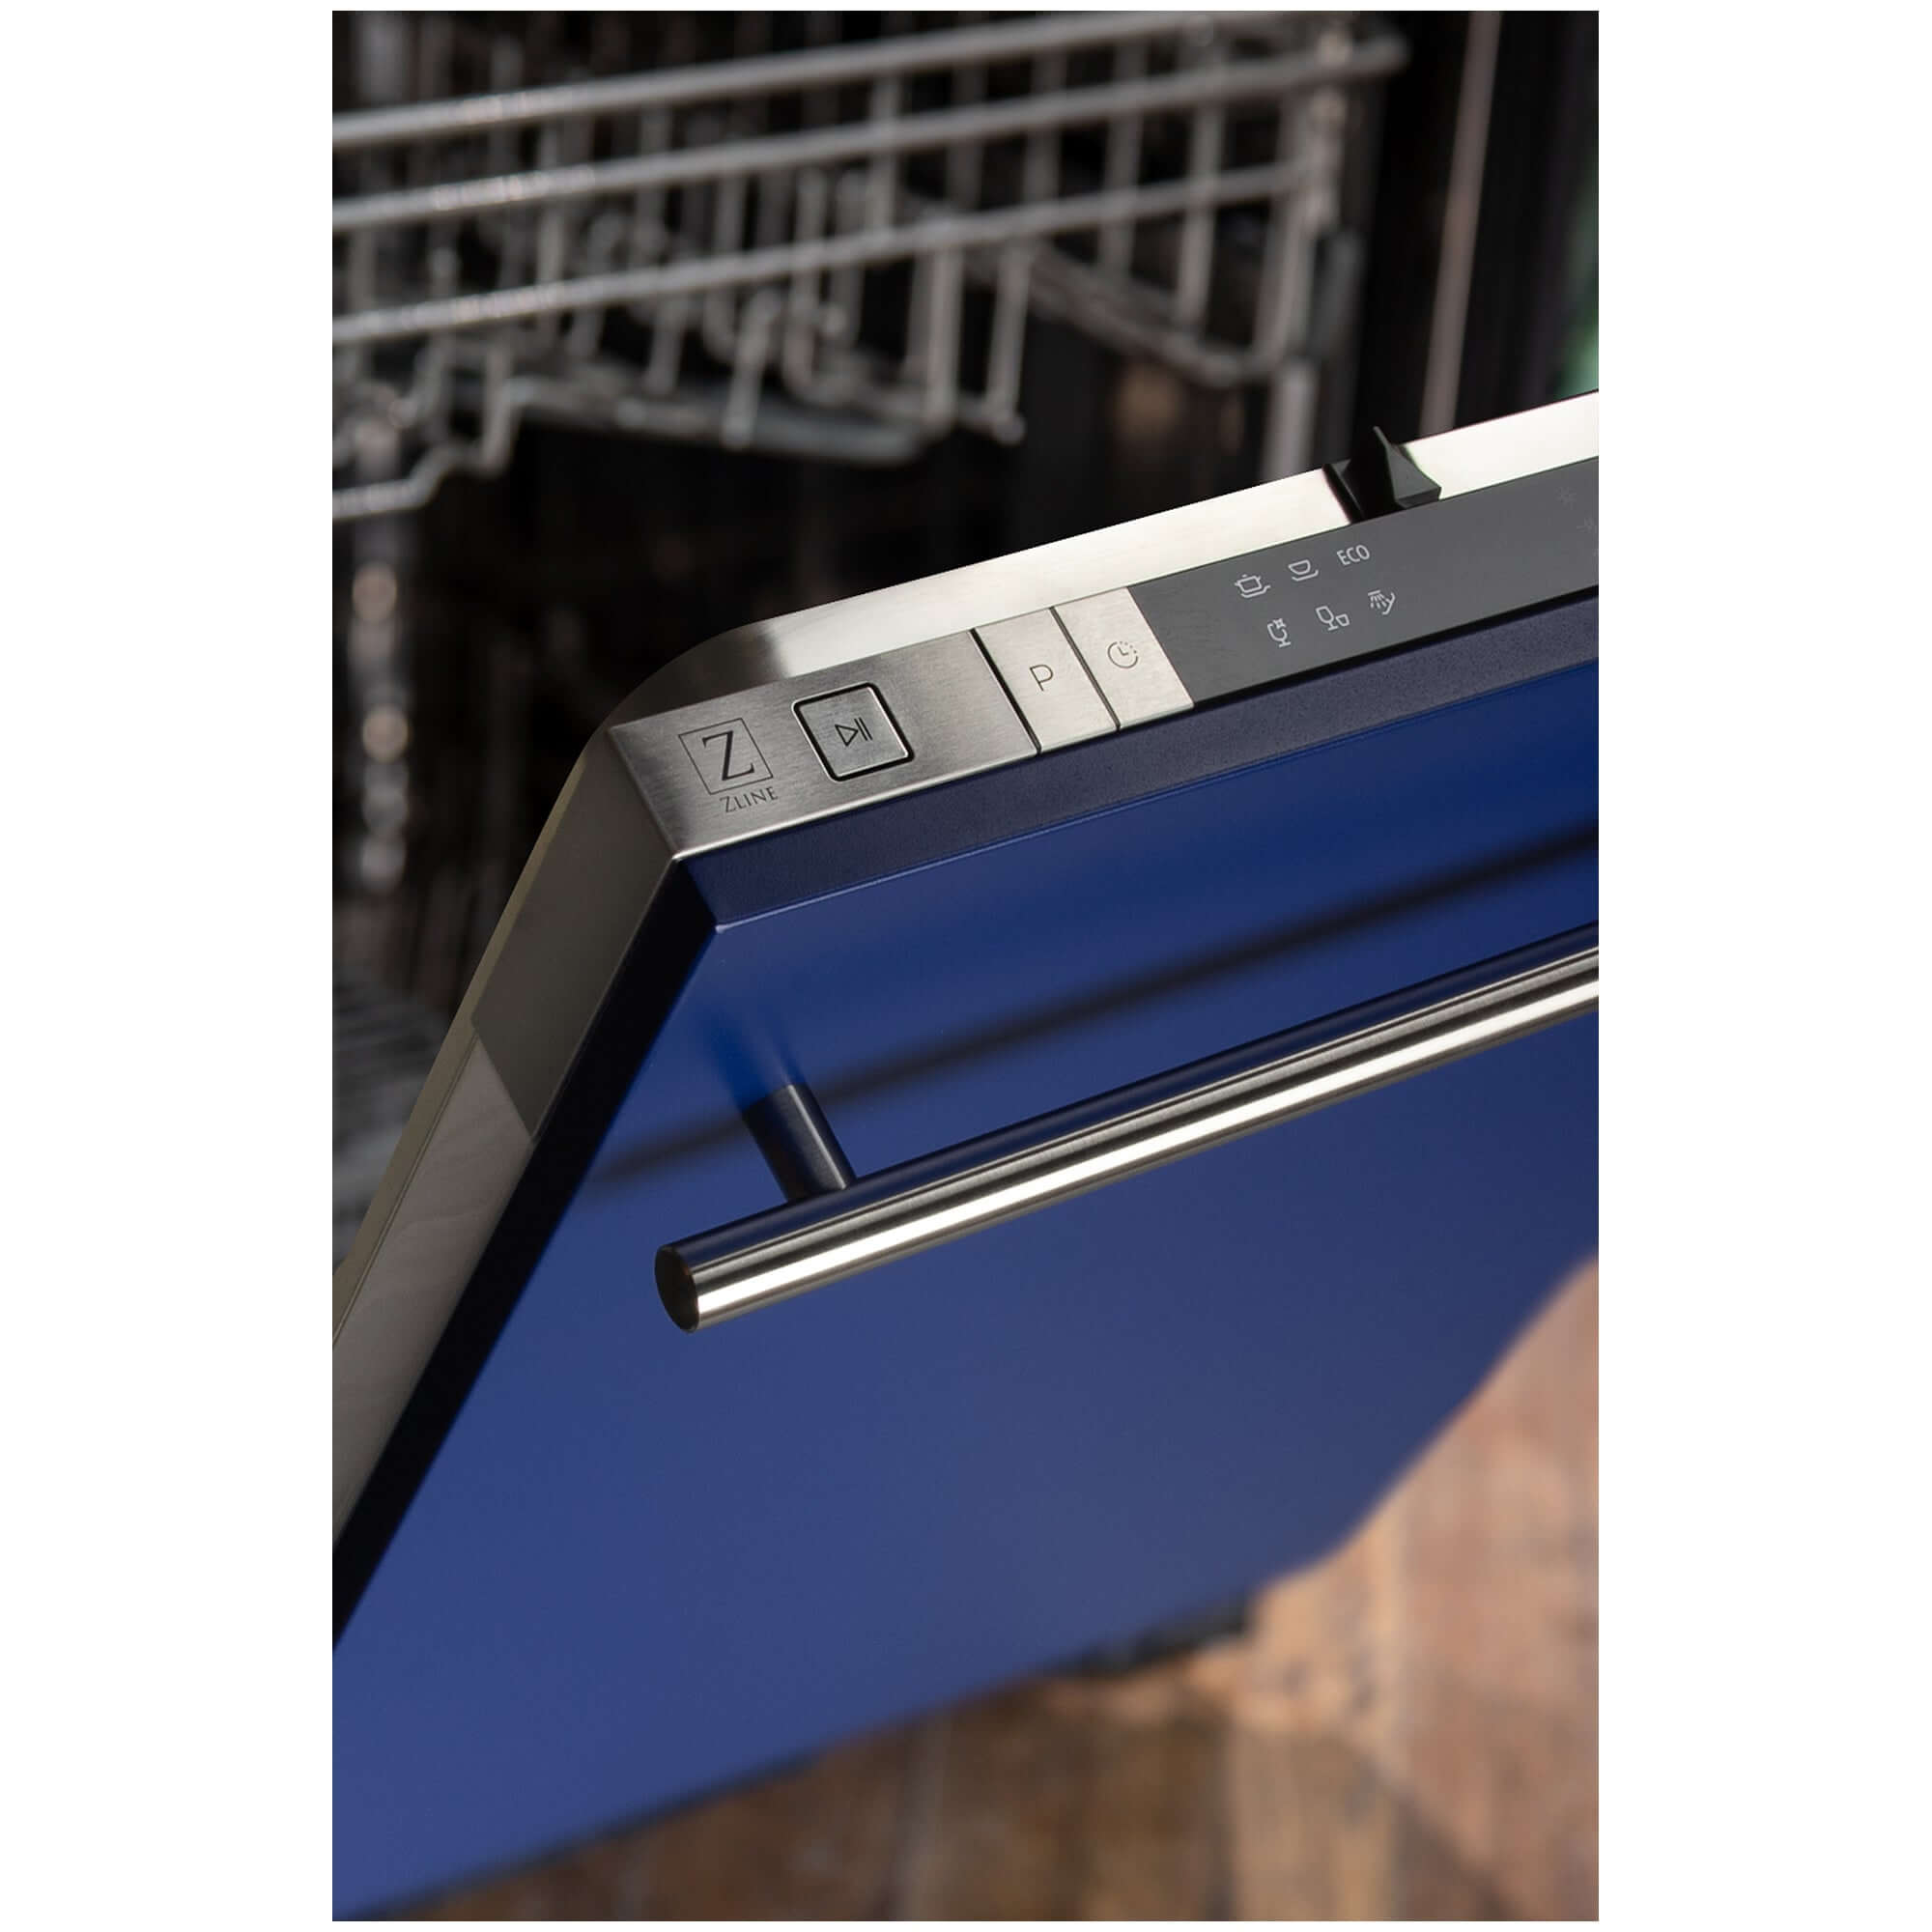 ZLINE 18 in. Compact Blue Matte Top Control Built-In Dishwasher with Stainless Steel Tub and Modern Style Handle, 52dBa (DW-BM-H-18) built-in to cabinets in a luxury kitchen.